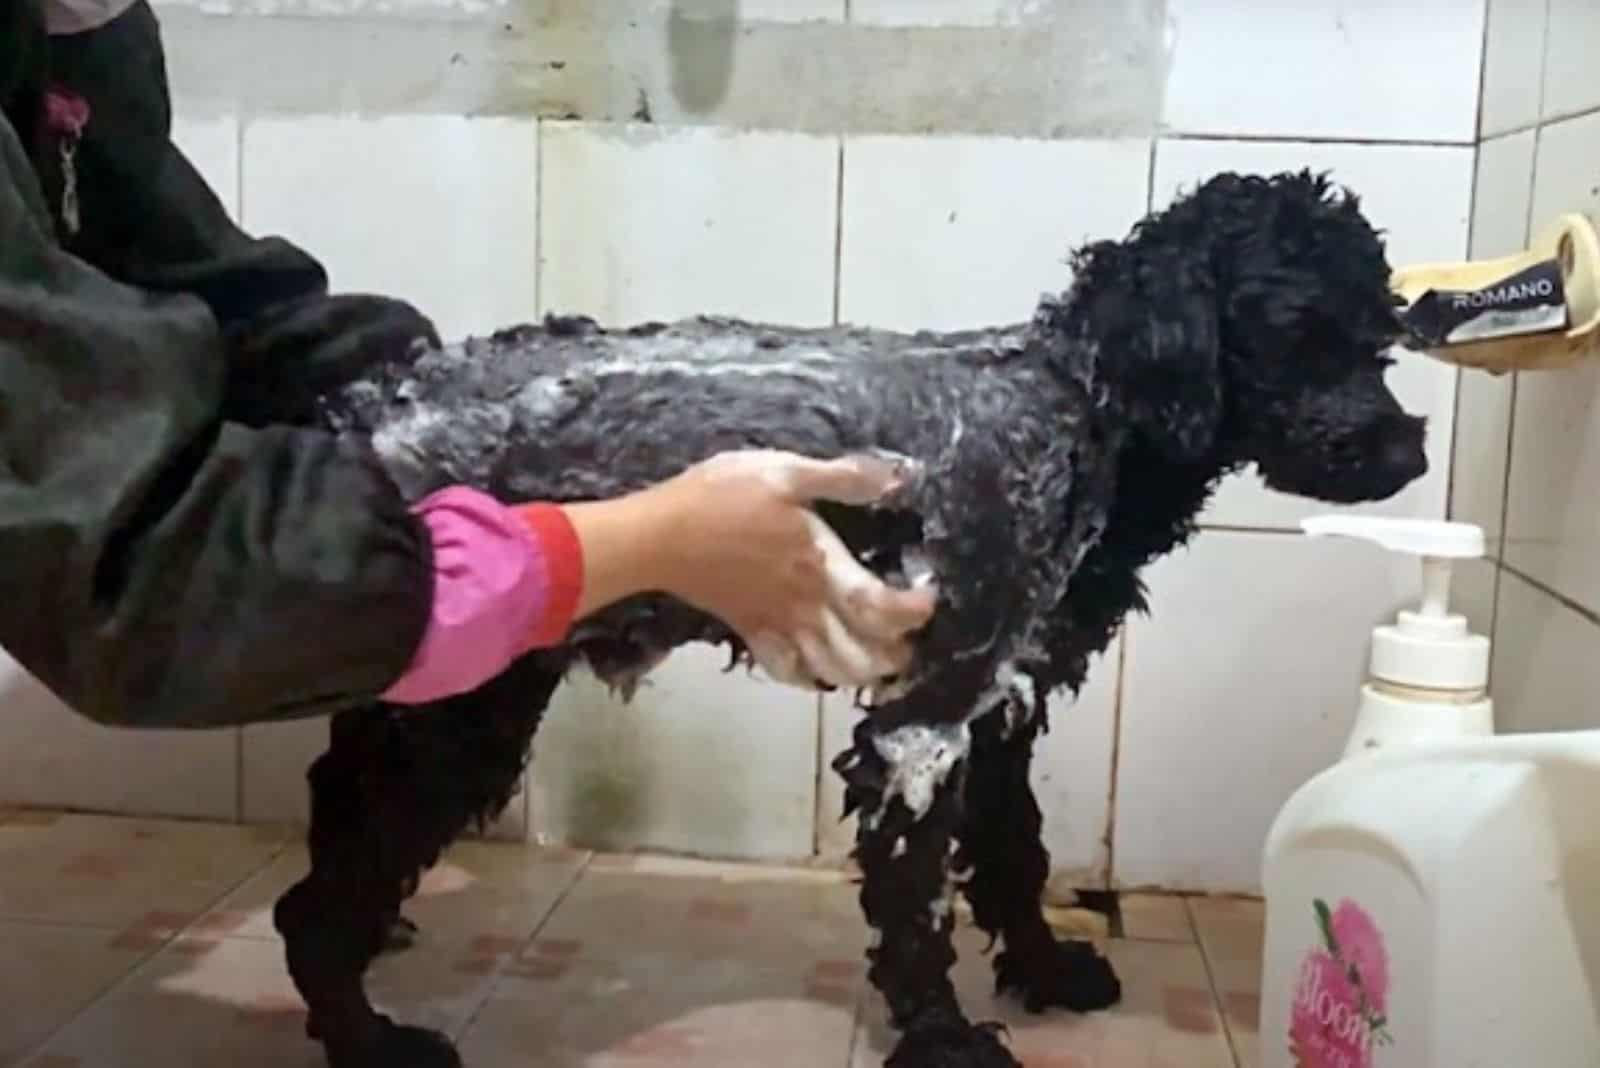 woman bathing poodle dog rescued from chain